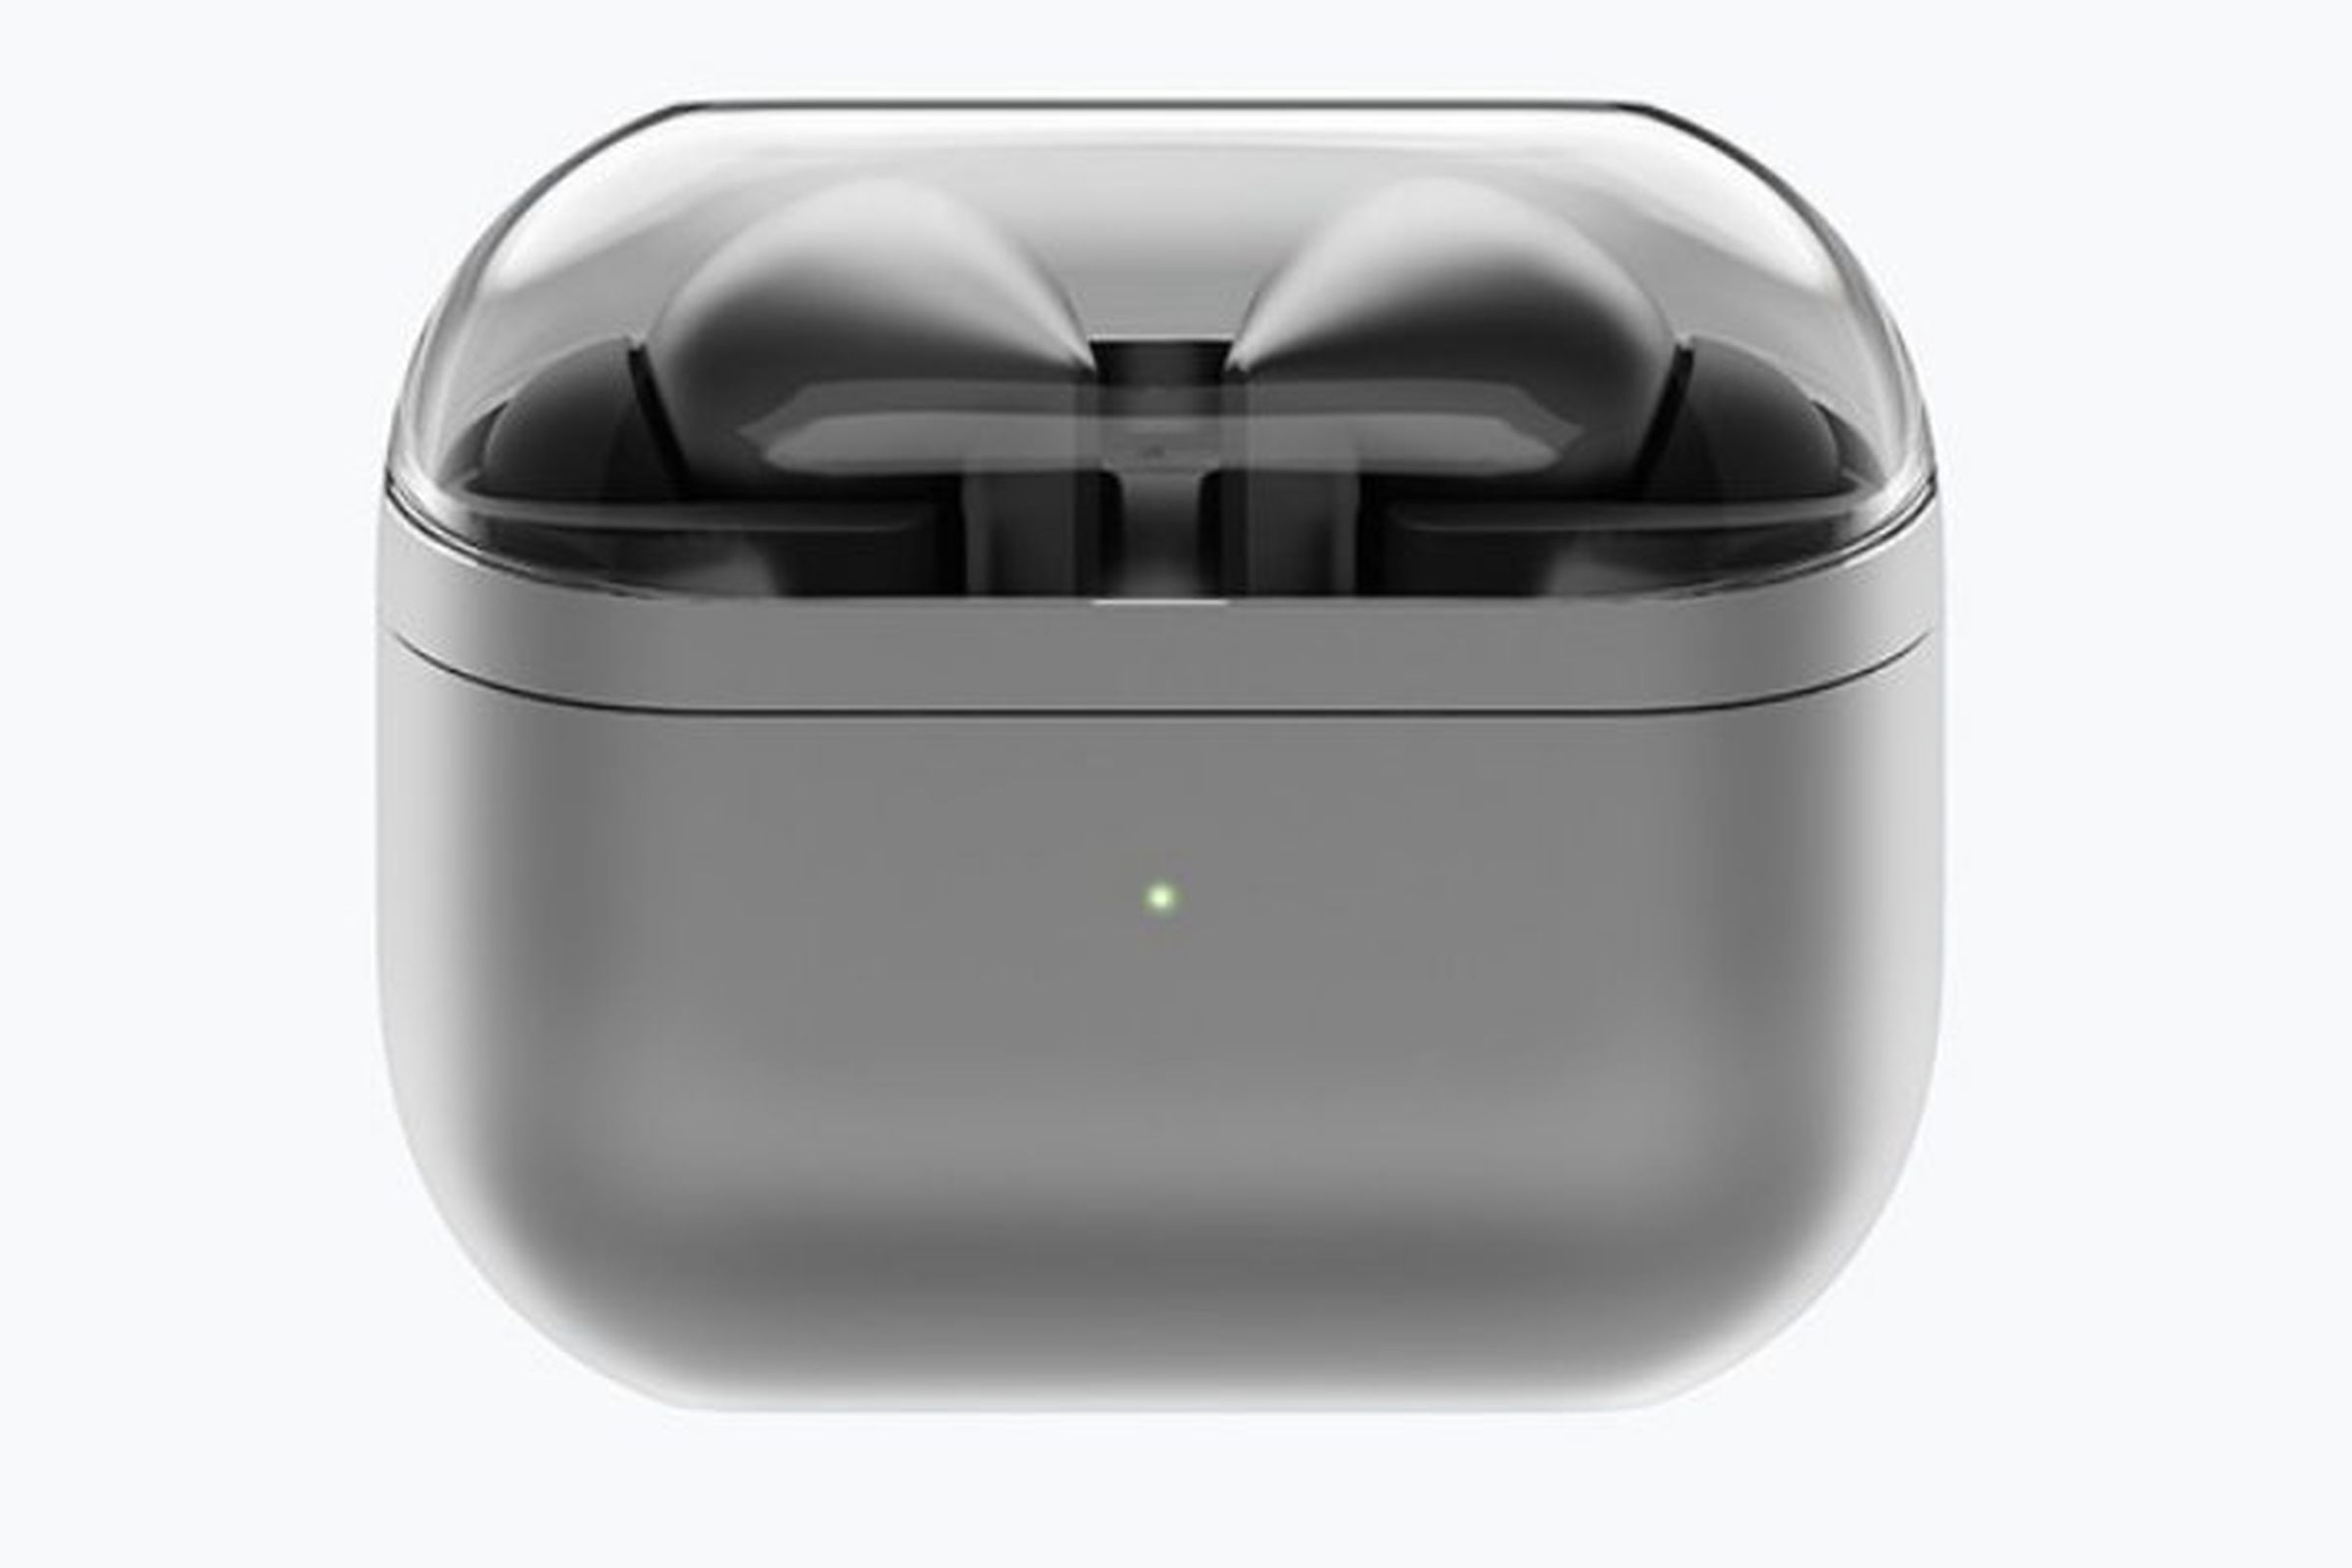 A render of the rumored Samsung Galaxy Buds 3 case and headphones.